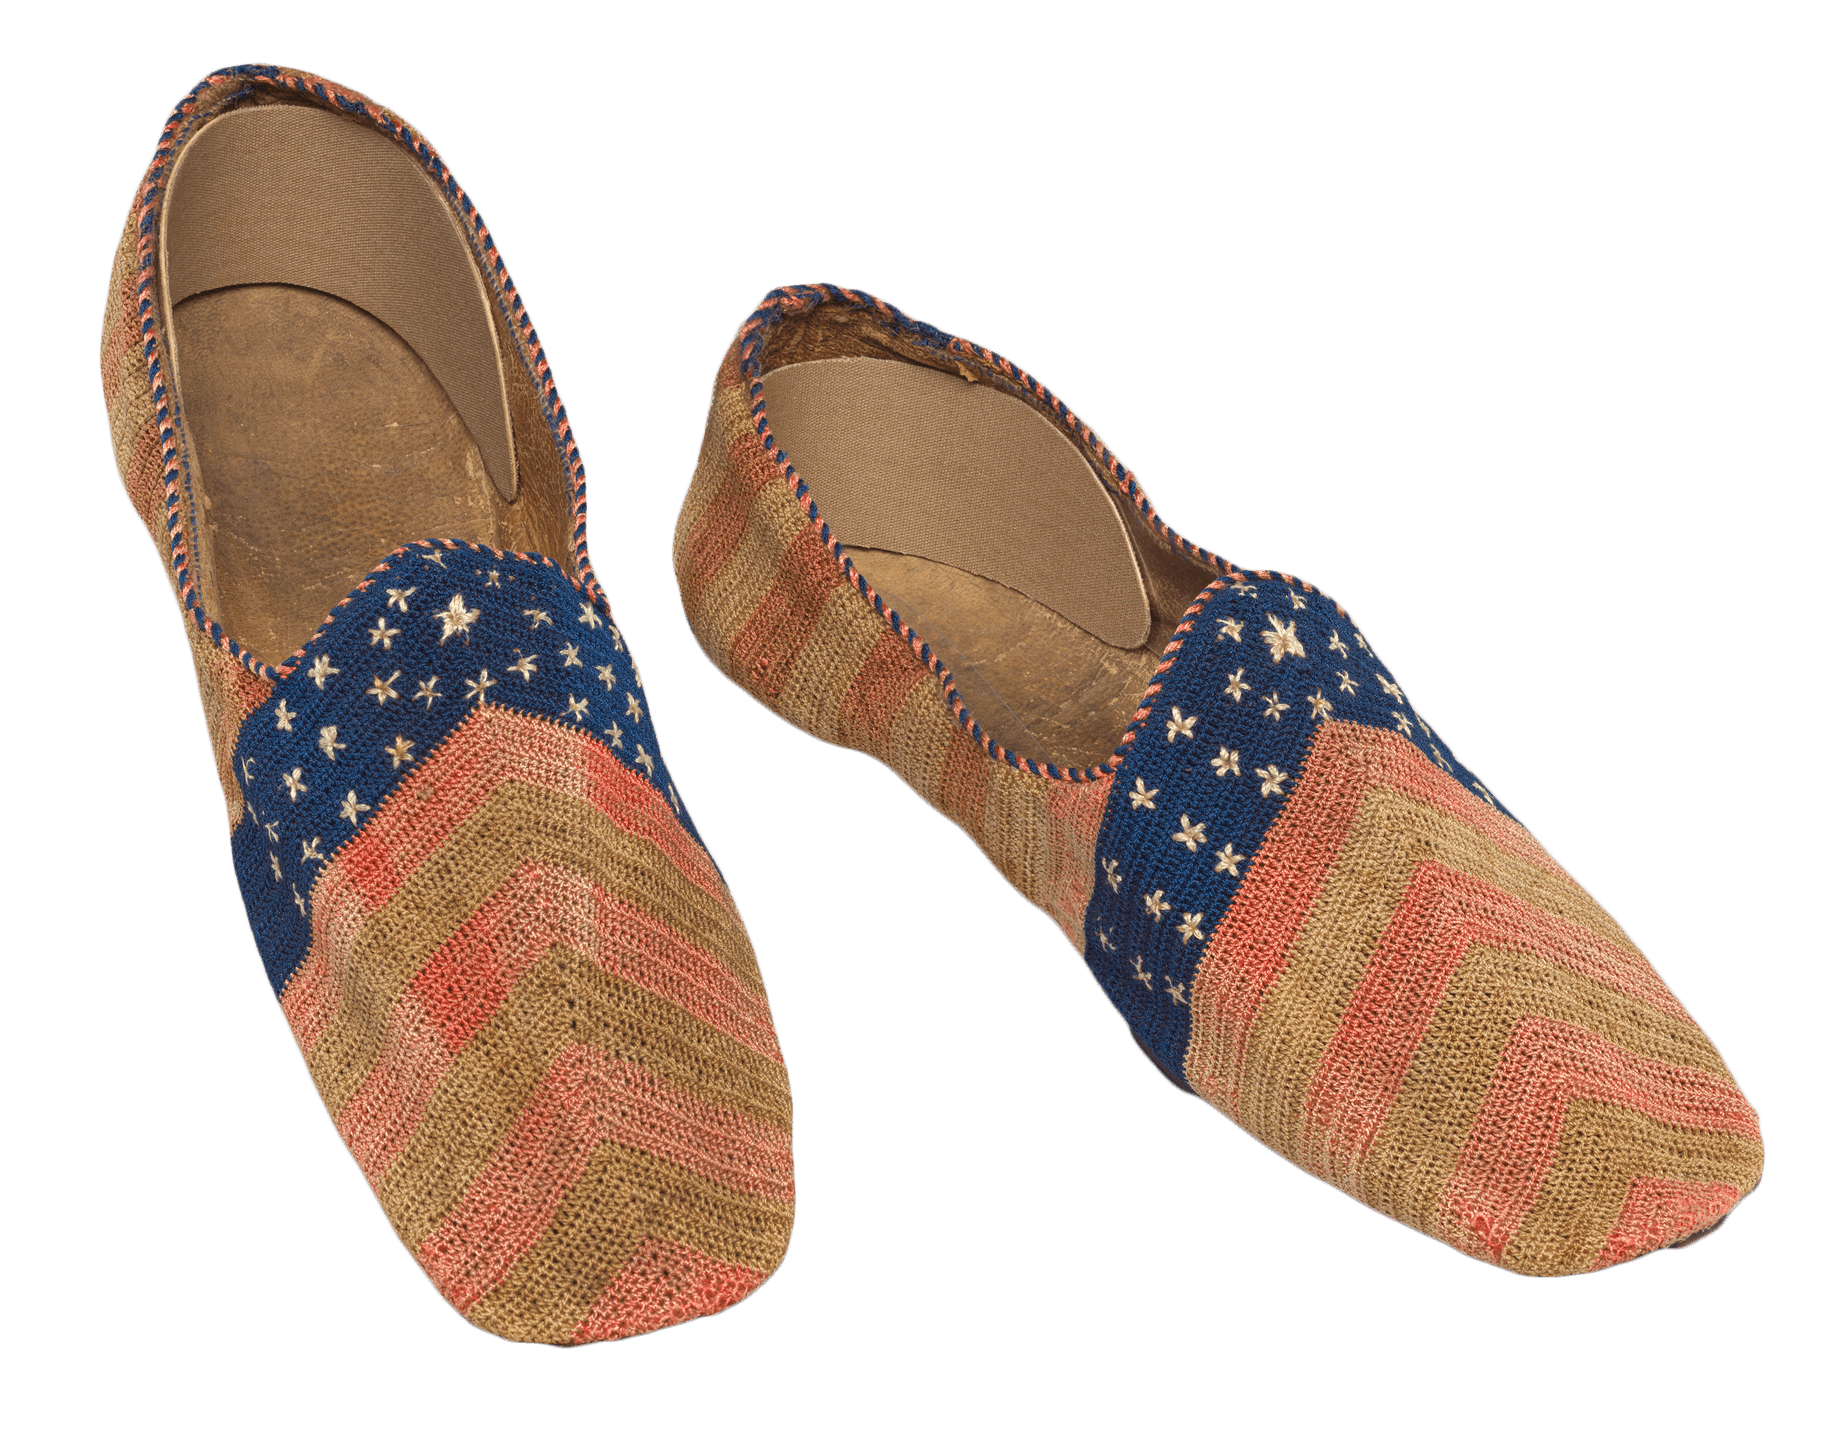 A pair of stars and stripes hand-woven slippers. The red and green chevron pattern is faded.